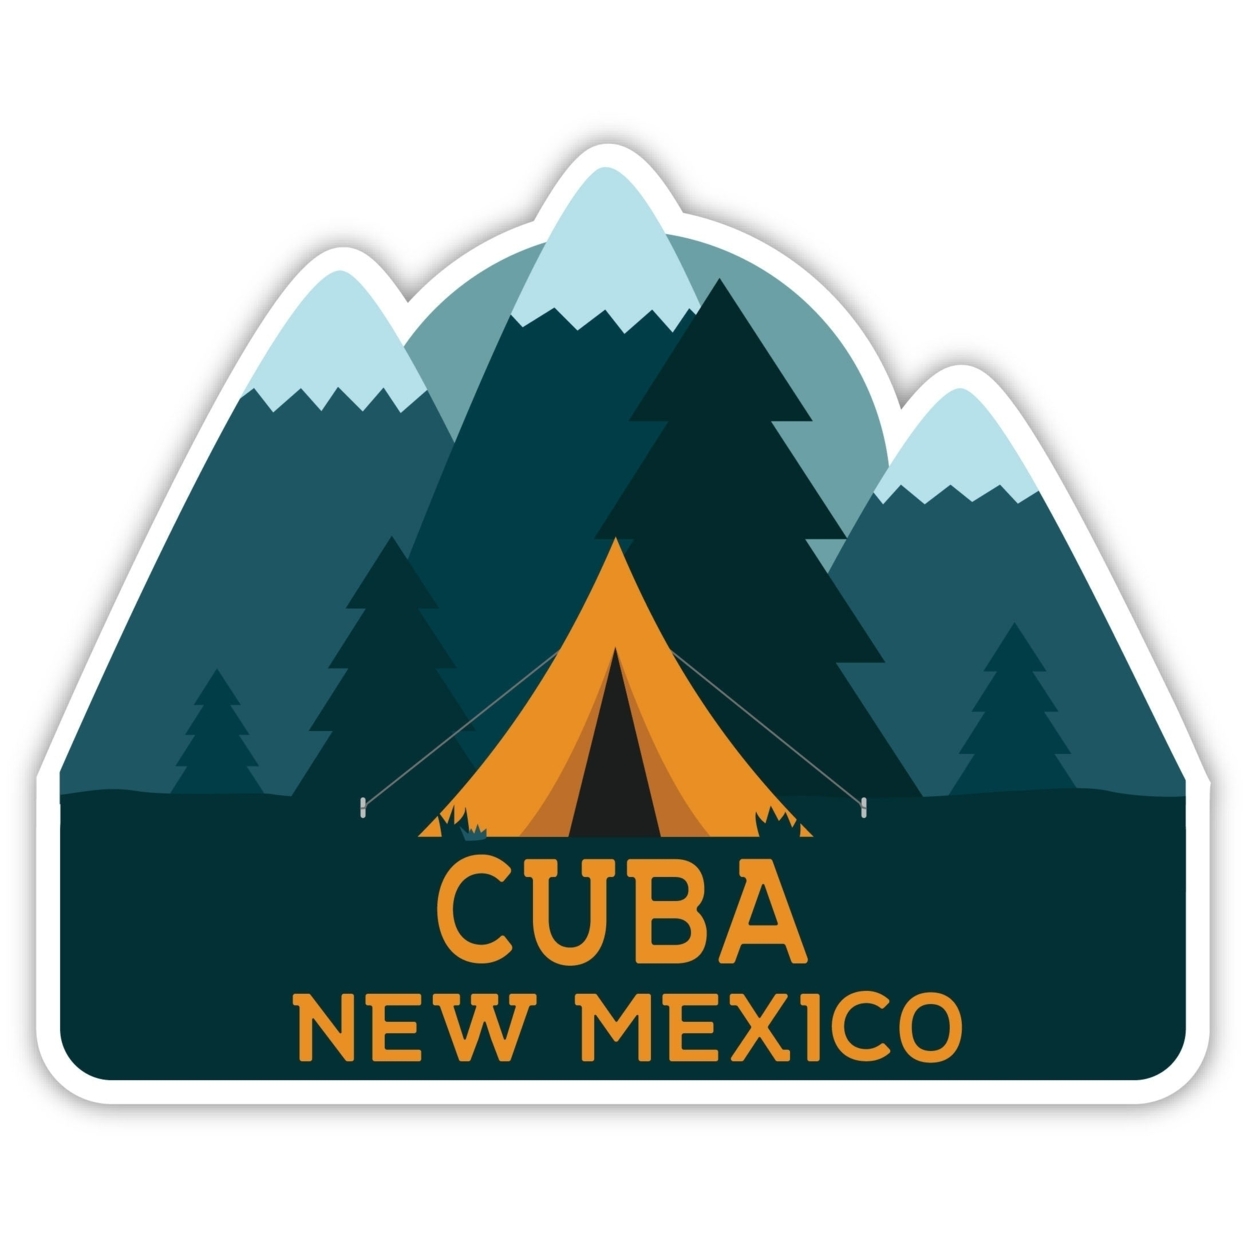 Cuba New Mexico Souvenir Decorative Stickers (Choose Theme And Size) - 4-Pack, 8-Inch, Tent